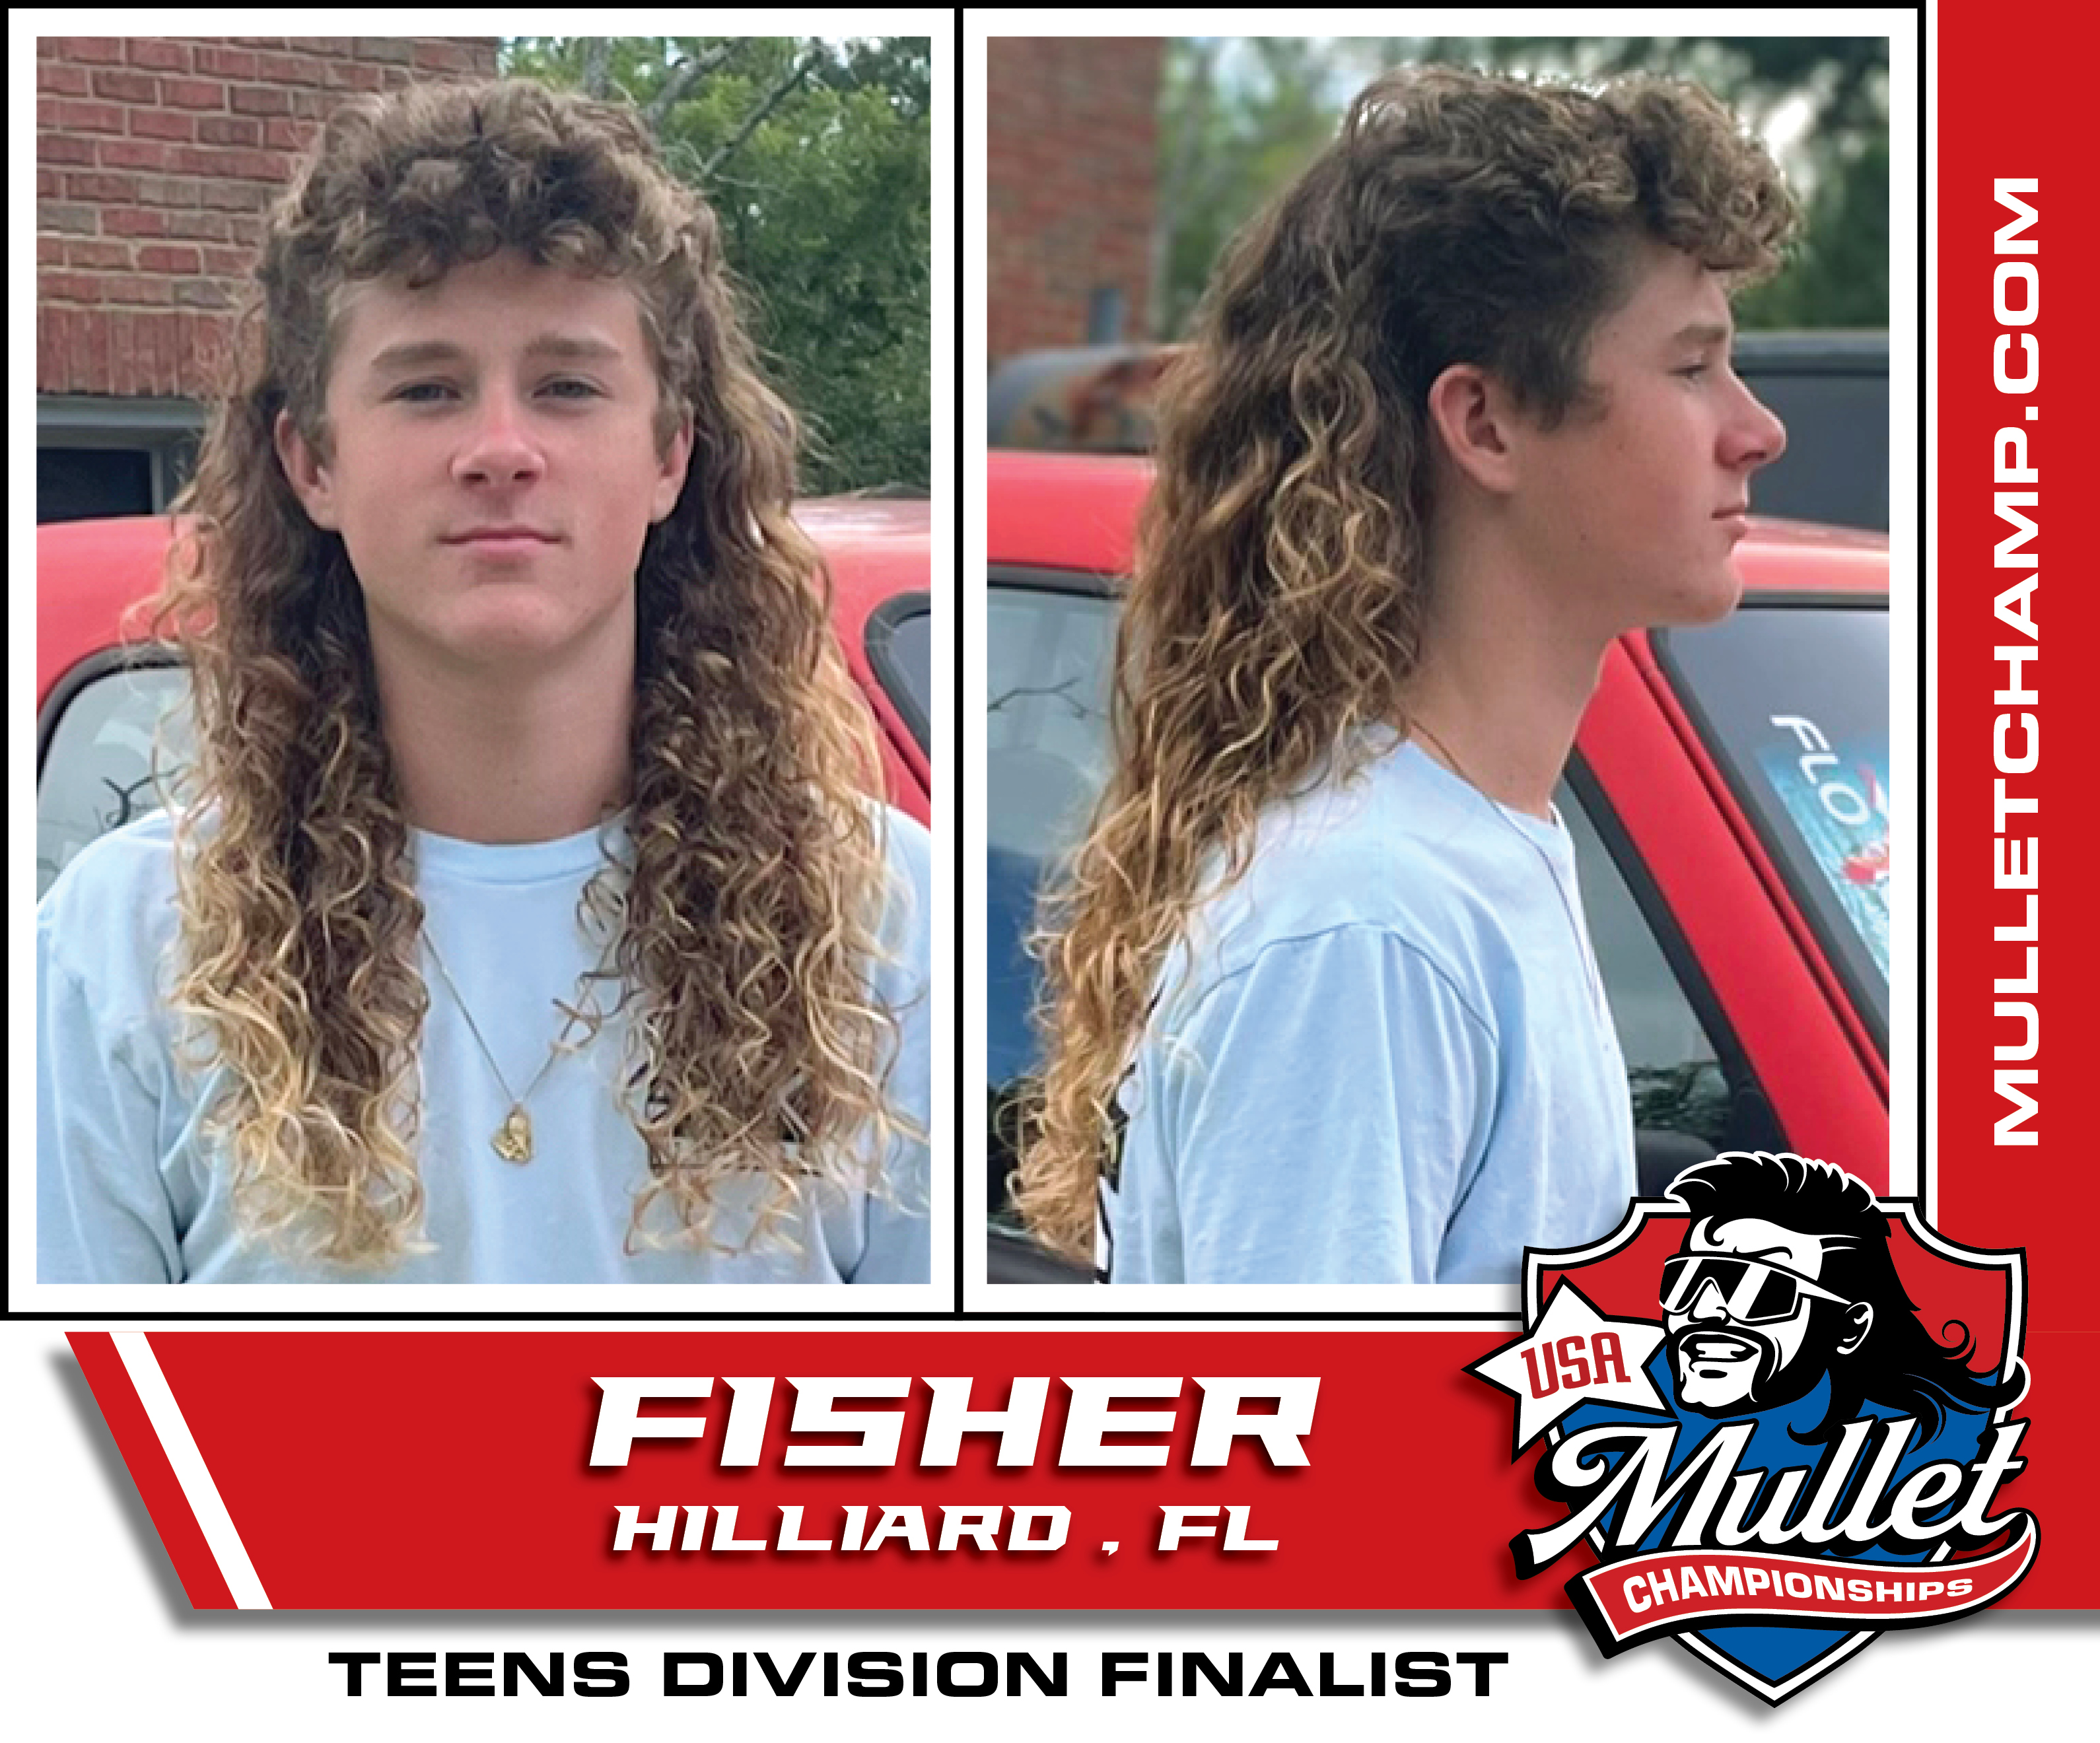 Fisher Monds, a teen division finalist in the 2022 USA Mullet Championships.